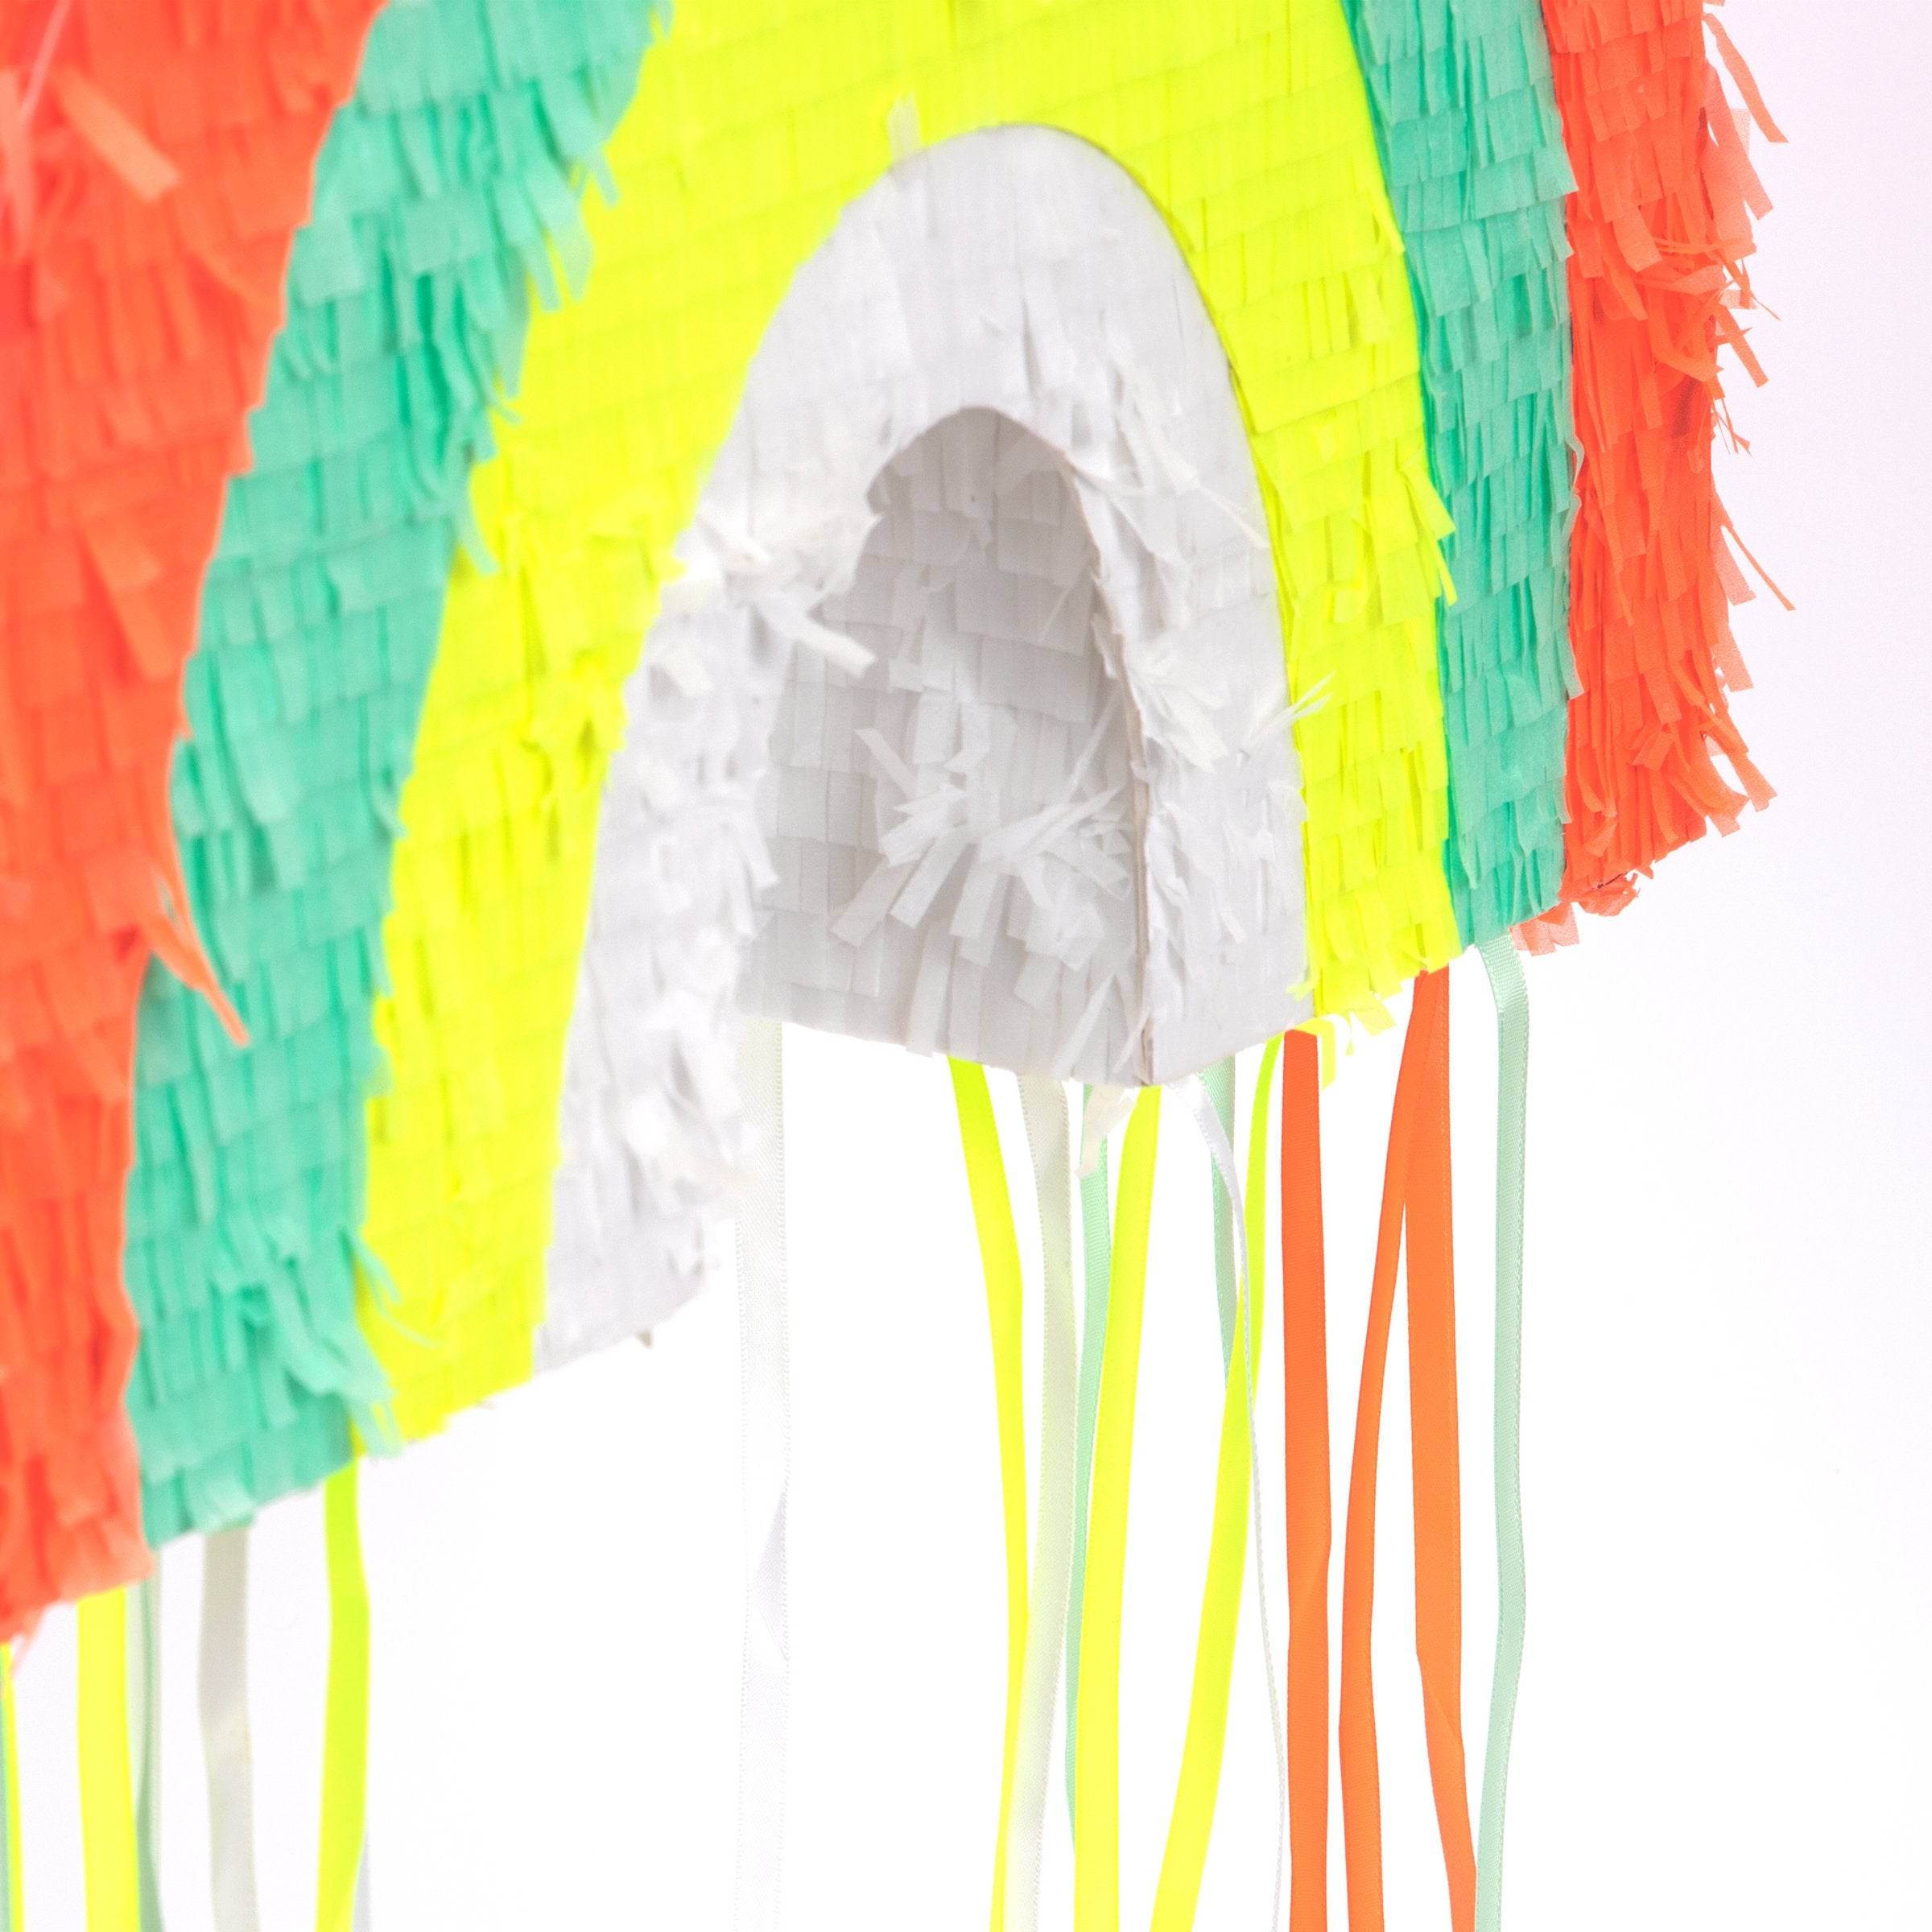 This rainbow pinata is beautifully decorated with colourful stripes and hanging ribbons.